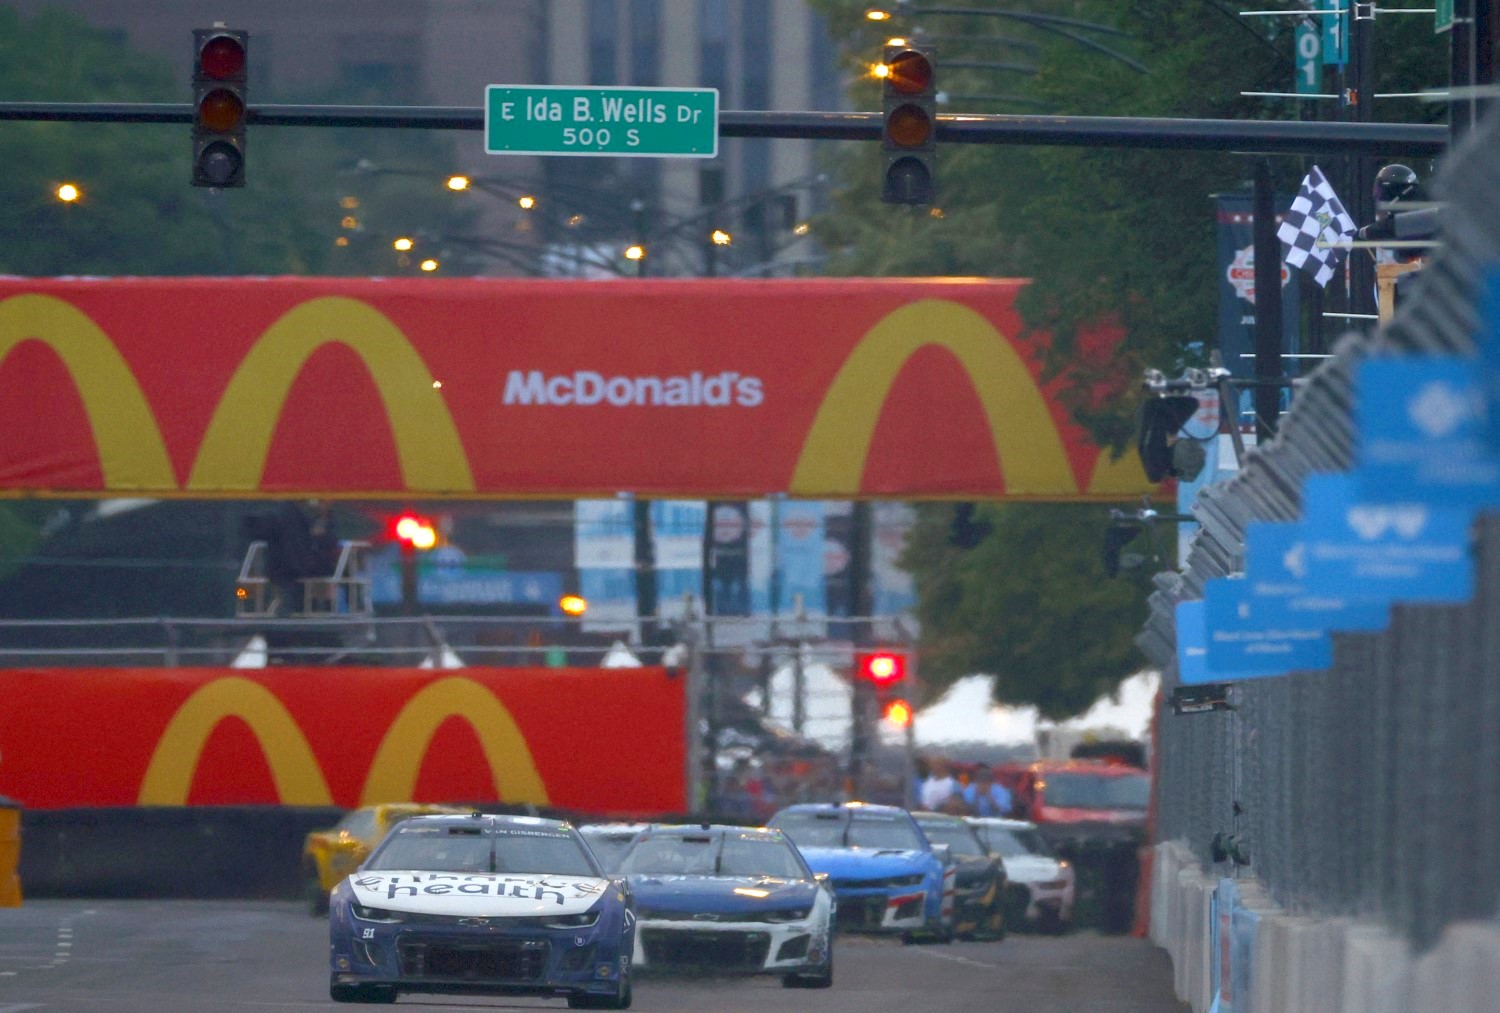 hane Van Gisbergen, driver of the #91 Enhance Health Chevrolet, takes the checkered flag to win the NASCAR Cup Series Grant Park 220 at the Chicago Street Course on July 02, 2023 in Chicago, Illinois. (Photo by Jared C. Tilton/Getty Images)